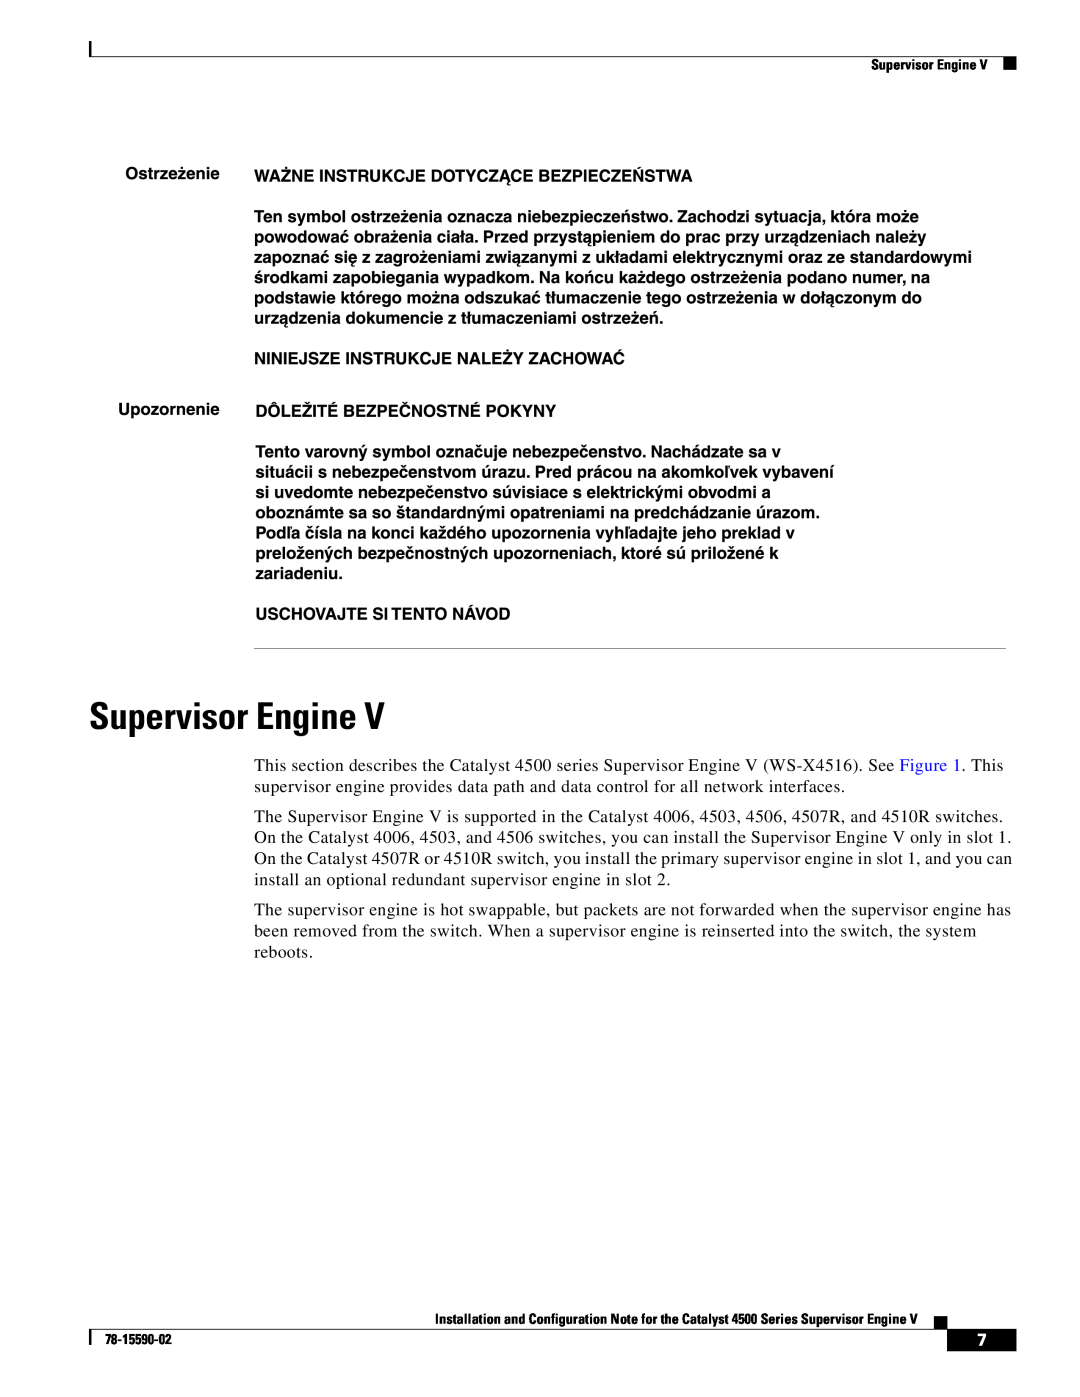 Cisco Systems WS-X4516 specifications Supervisor Engine 